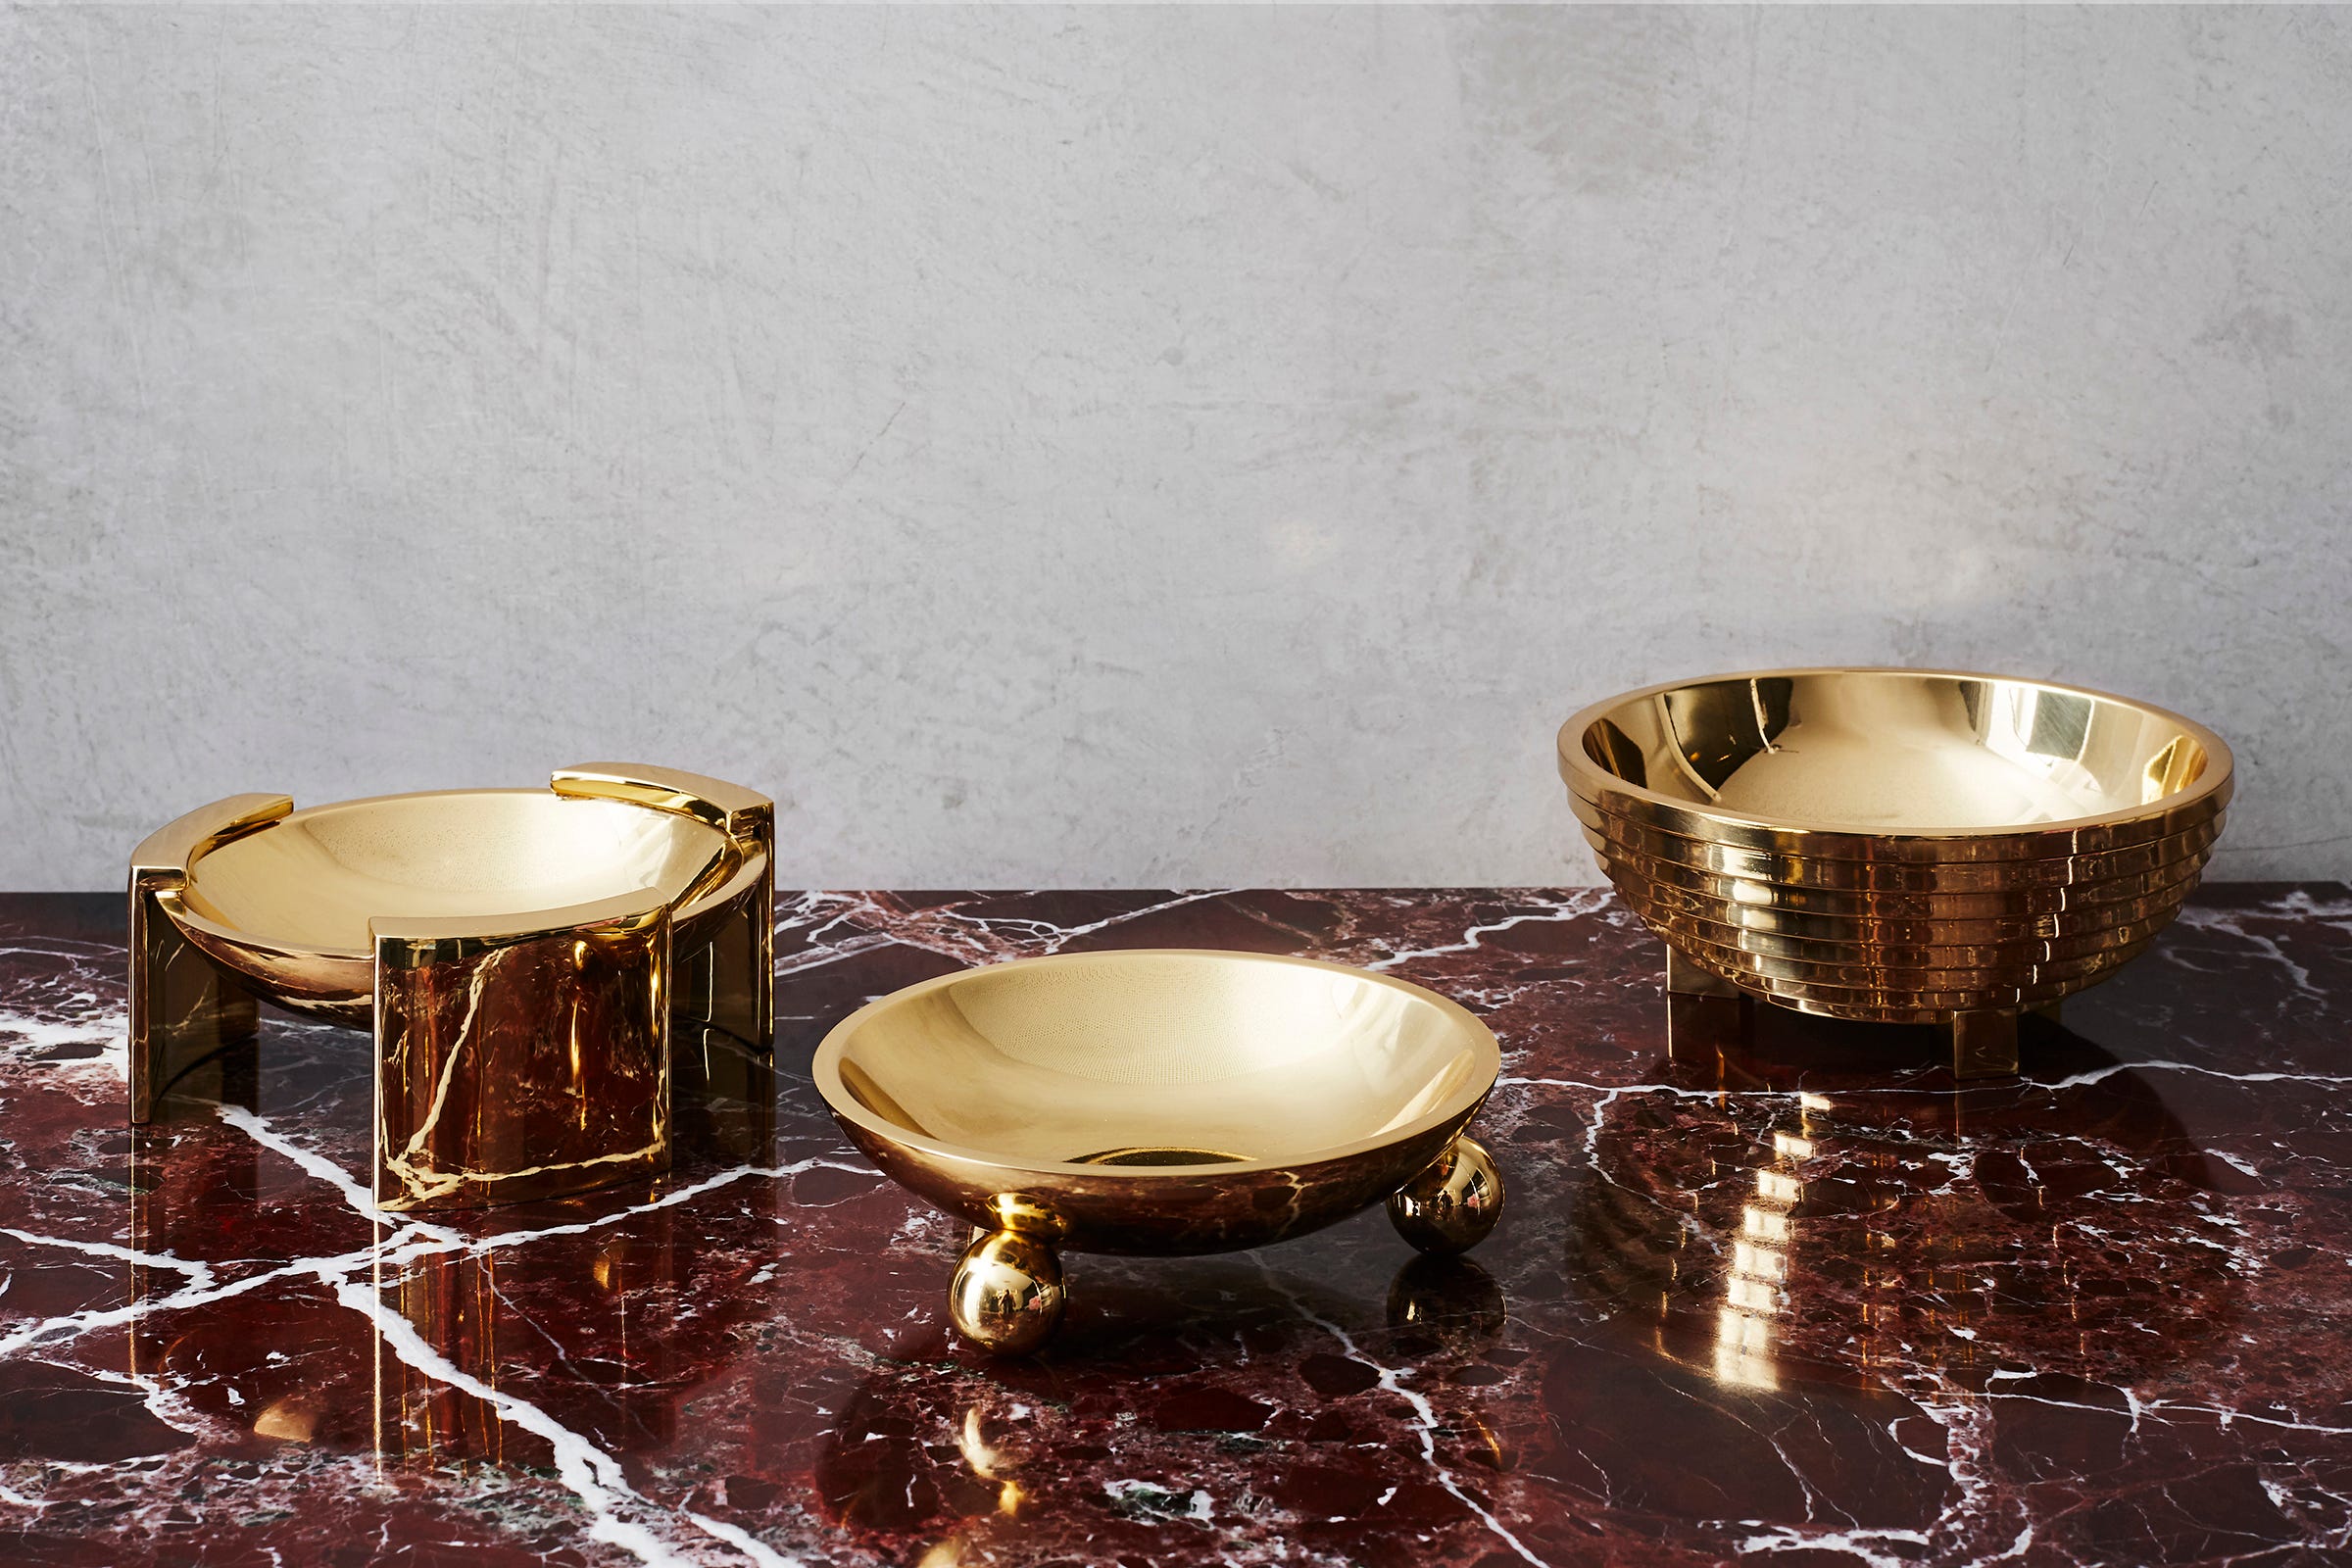 Hand-cast and hand-polished brass bowls add a layer of elegance, says Natale. From left to right: Boule, Trident (on wide legs) and Ziggurat, from his collection. They are lacquered to preserve their luster.